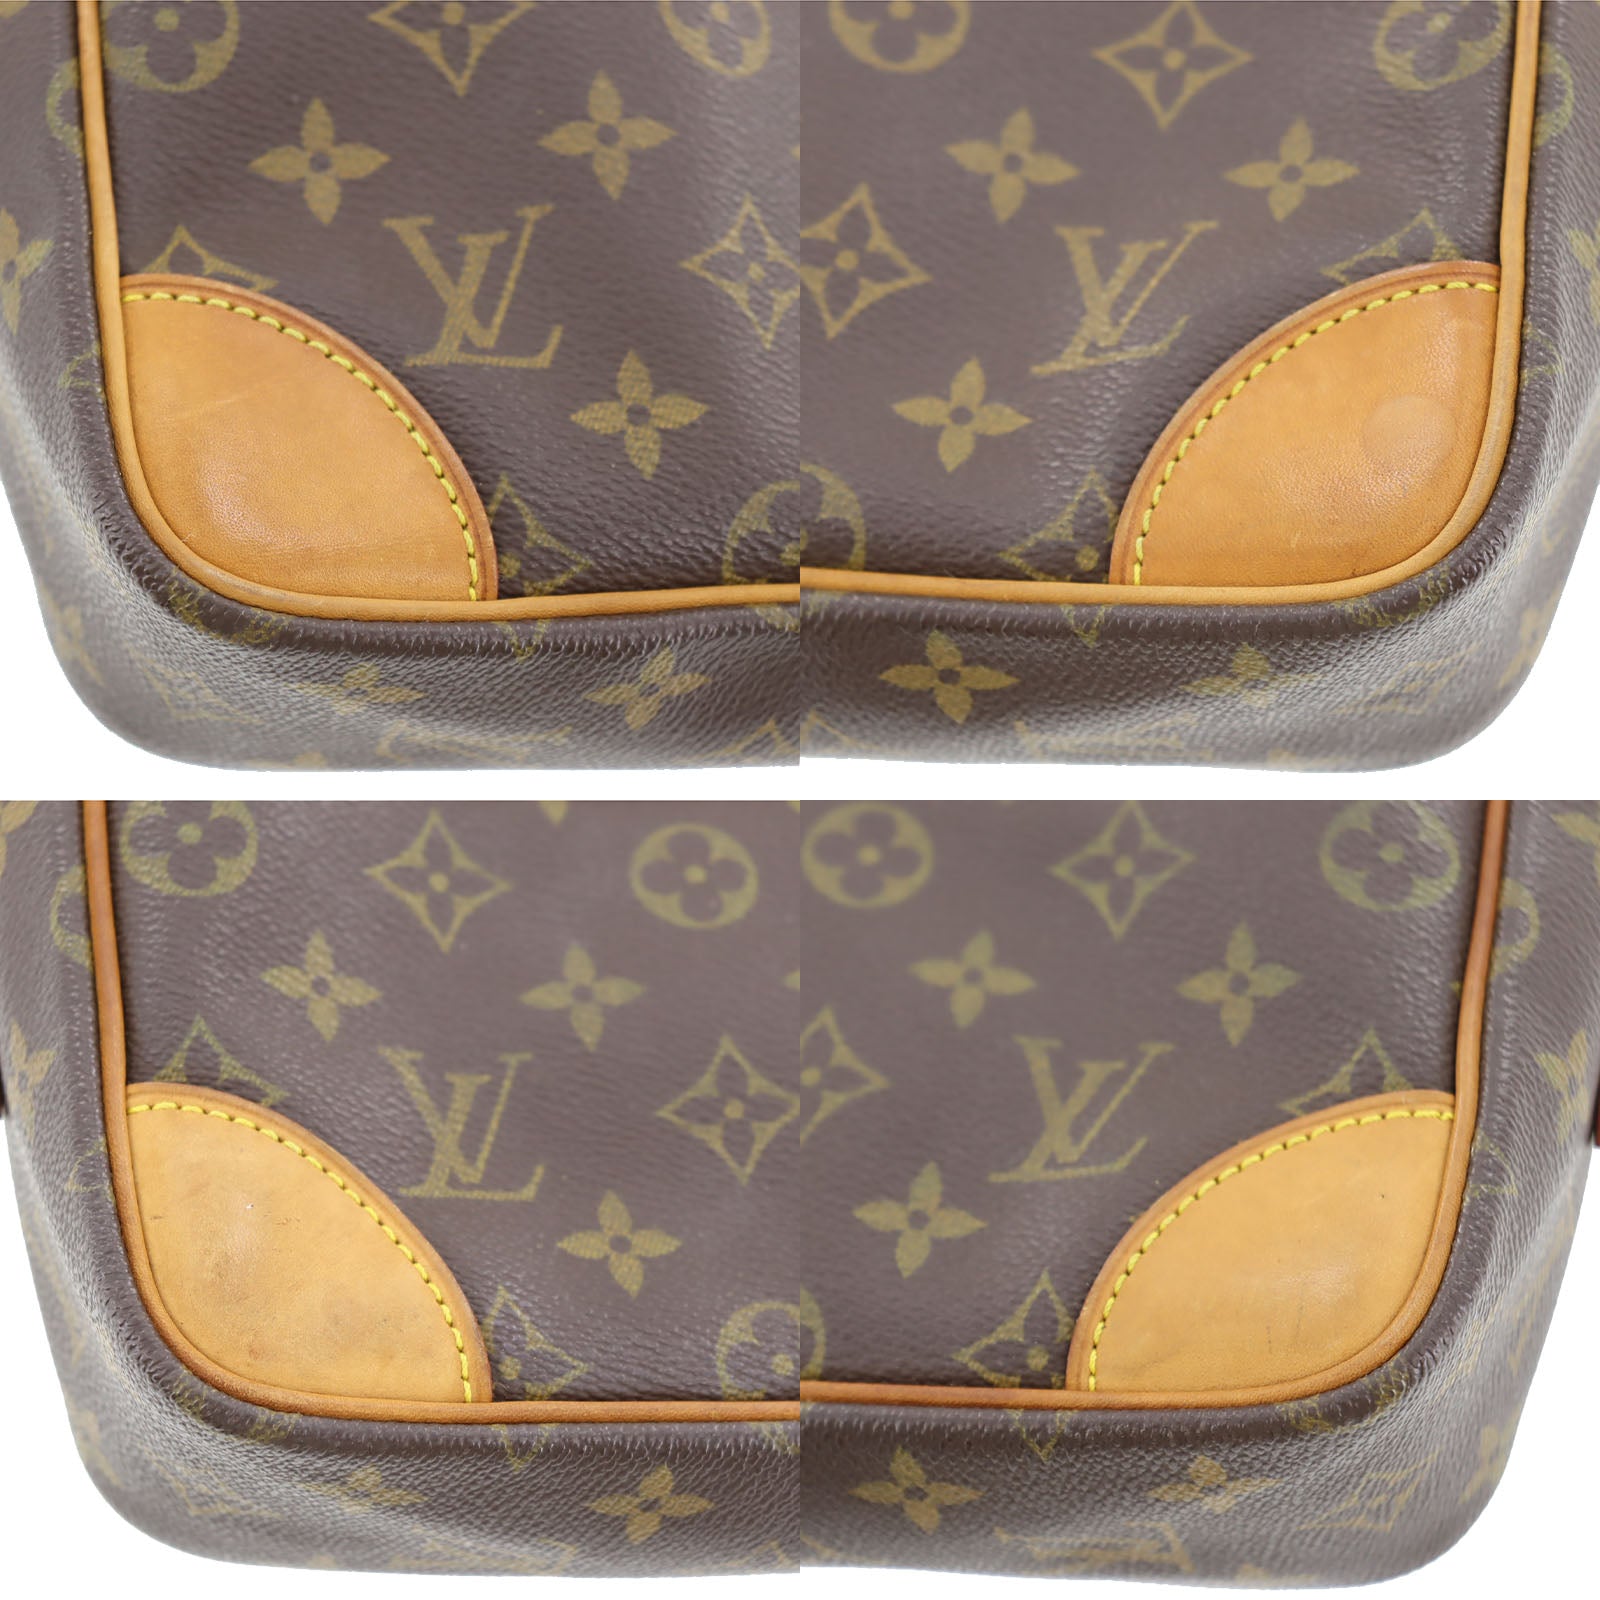 Authenticated Used LOUIS VUITTON Looping GM Shoulder Bag Monogram M51145 